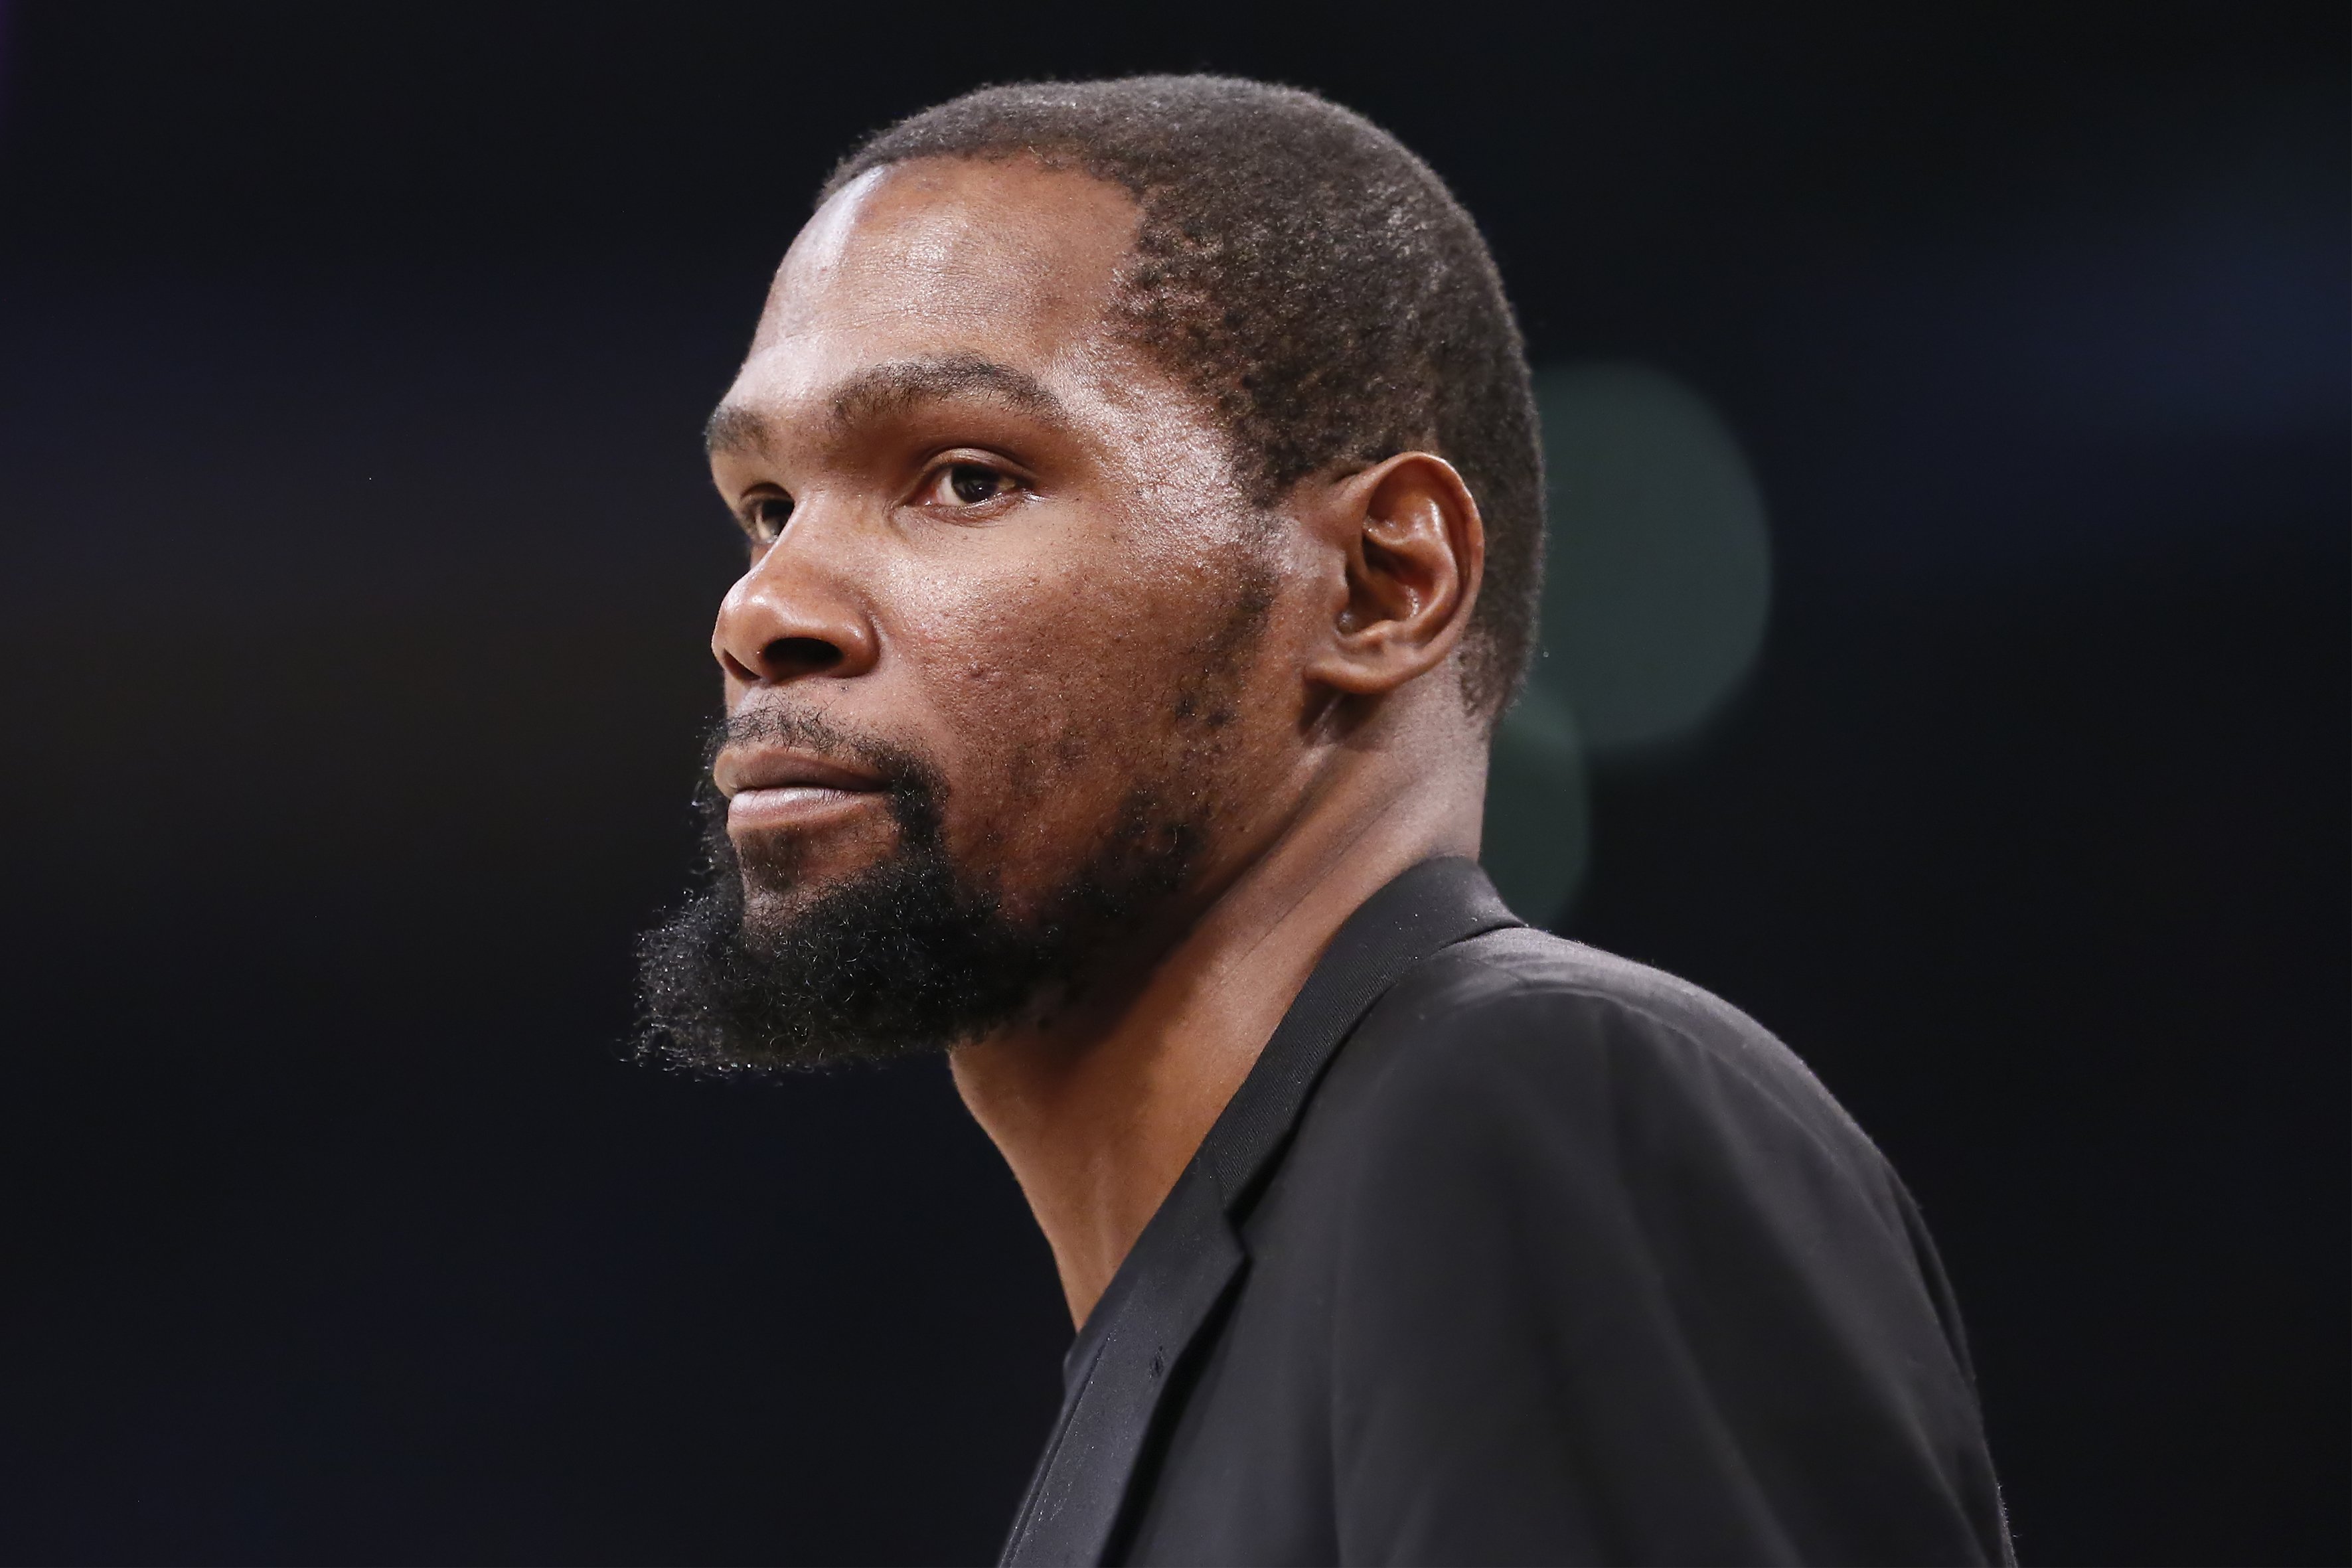  Kevin Durant looks on during a game at the Staples Center on March 10, 2020. | Photo: Getty Images